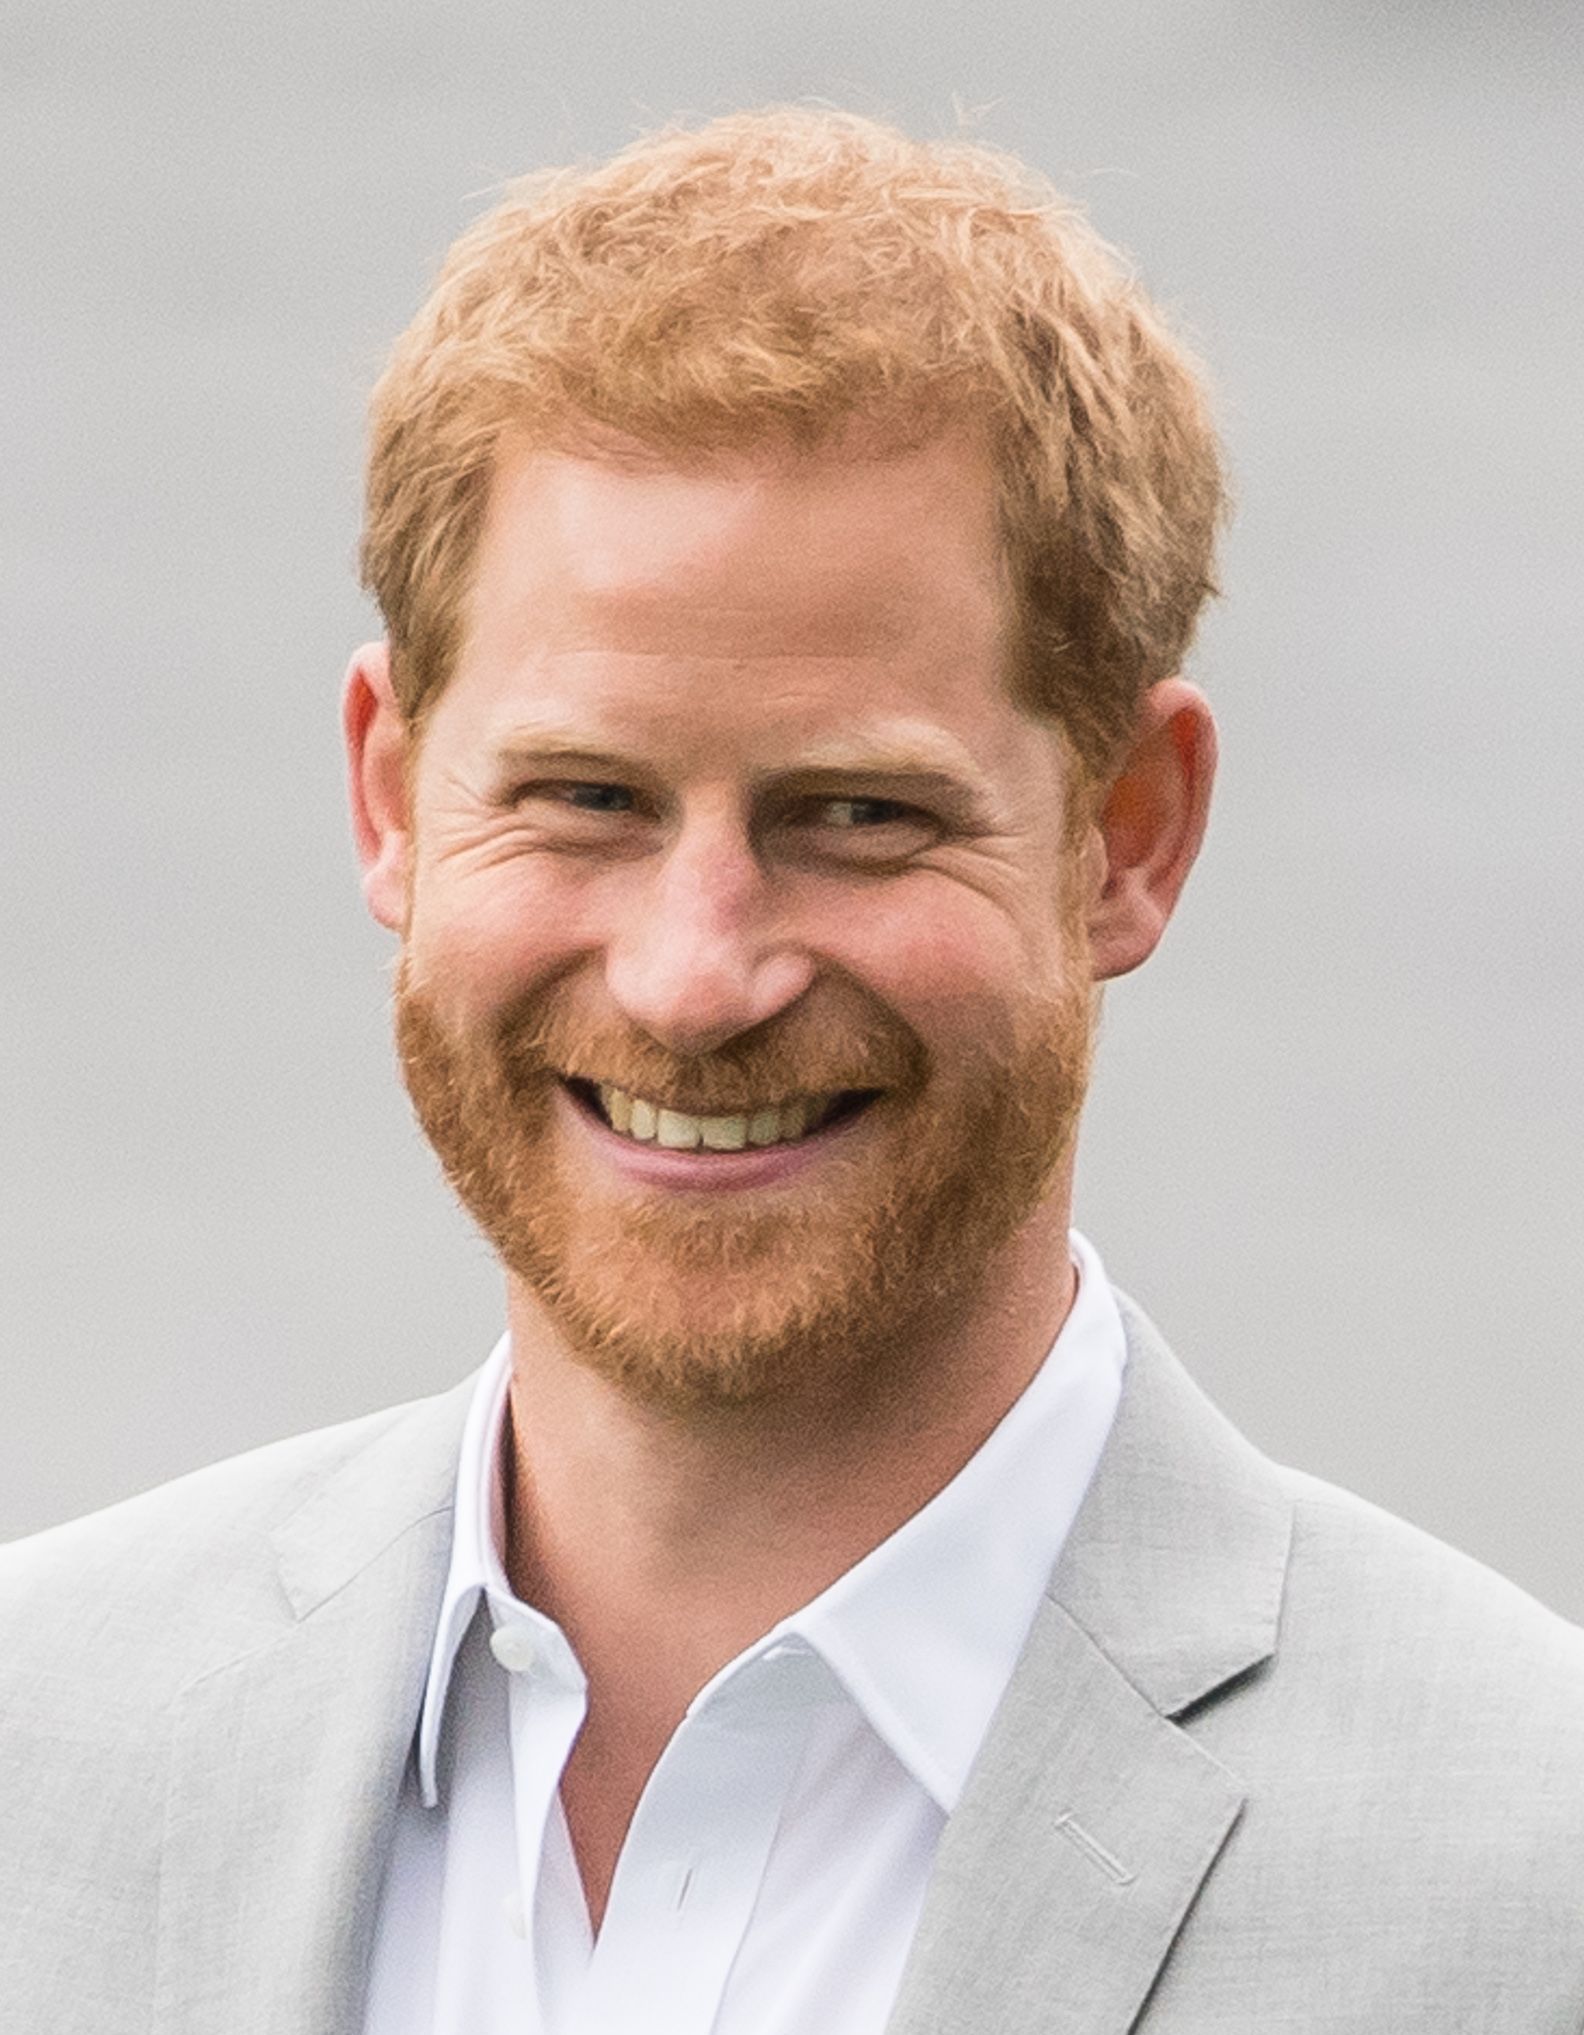 Prince Harry, Duke of Sussex, British Royal Family Wiki